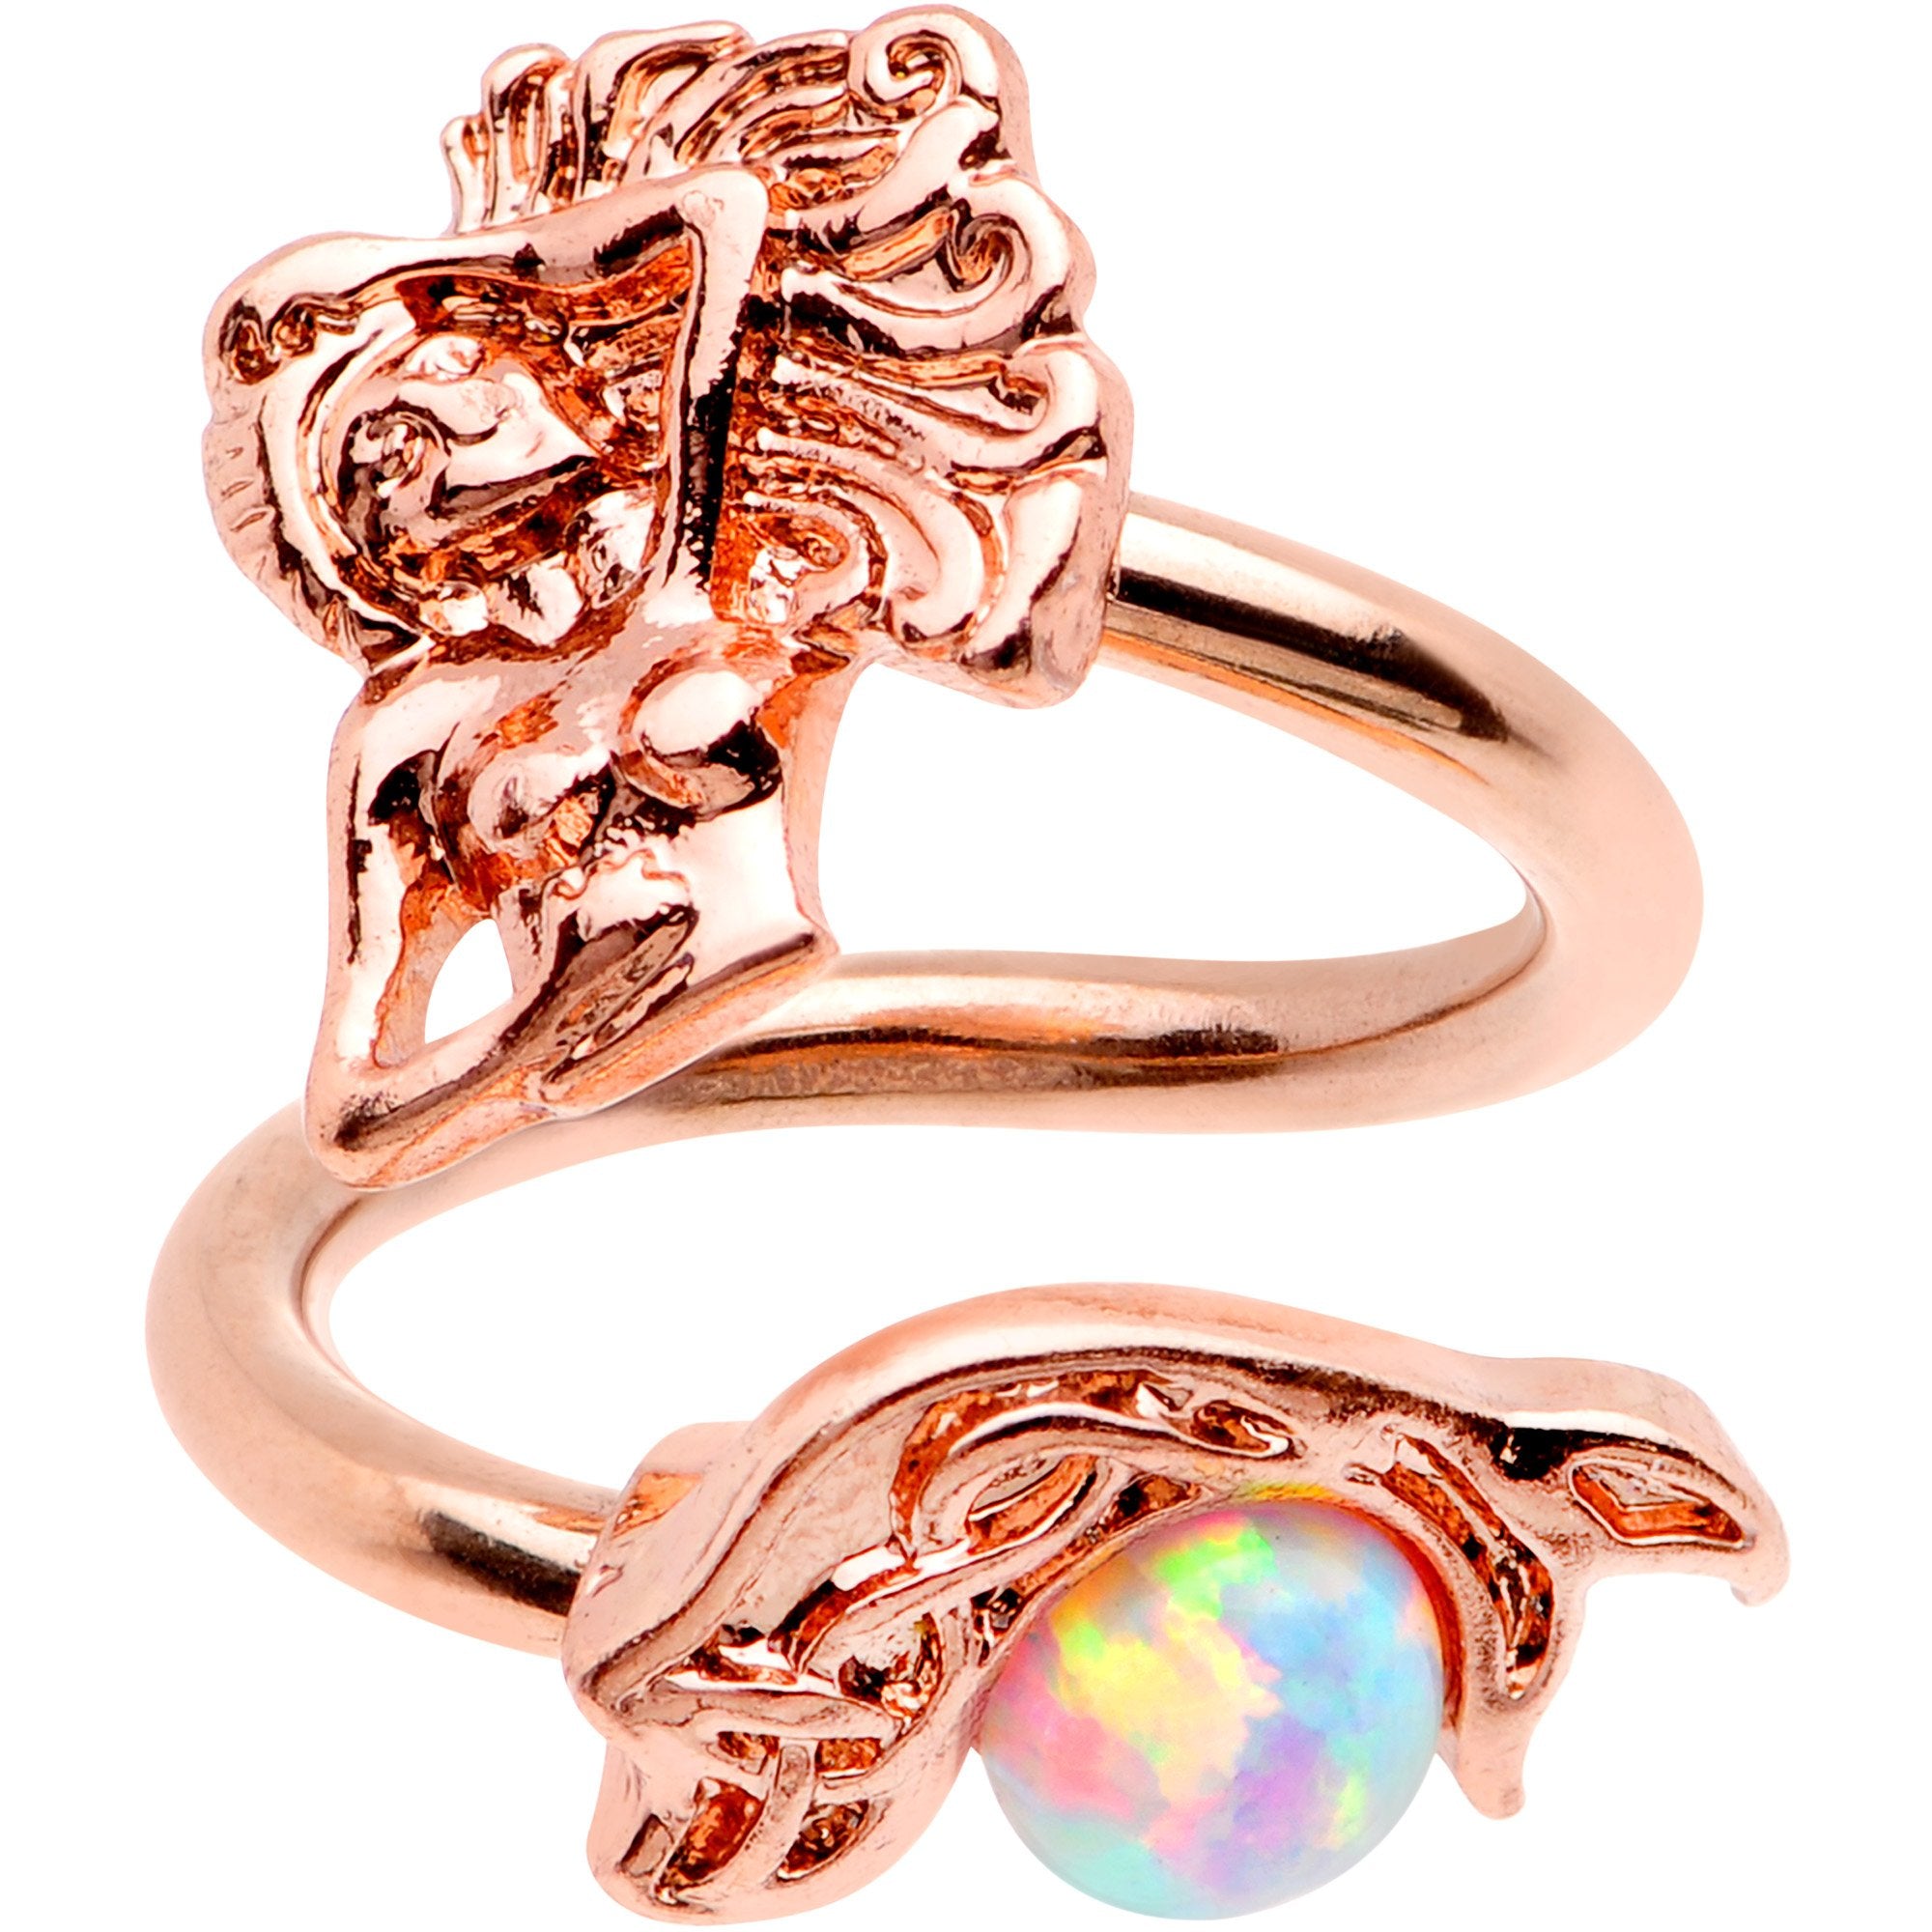 White Synthetic Opal Rose Gold PVD Mermaid Spiral Twister Belly Ring